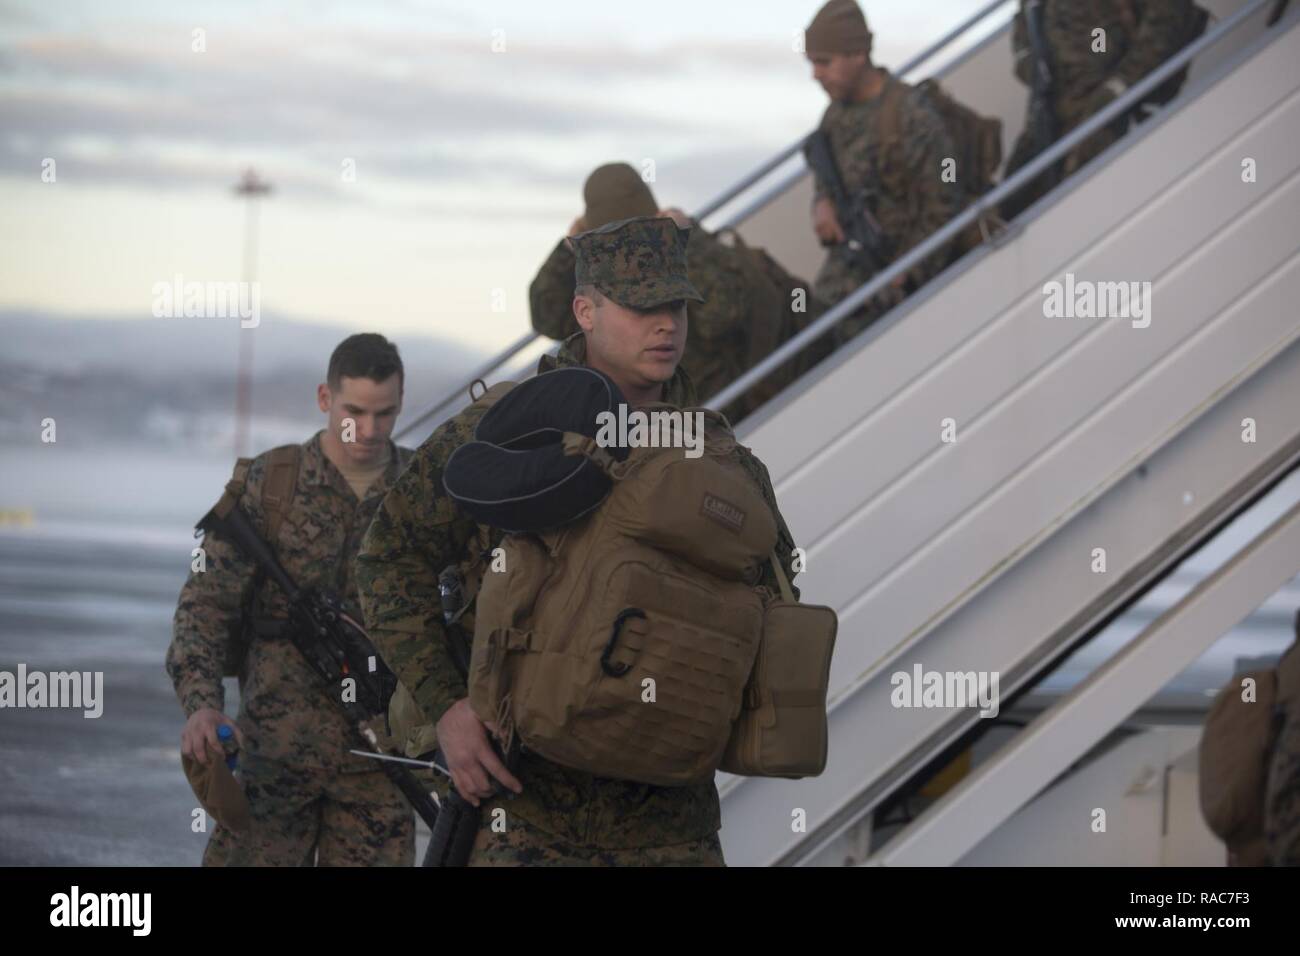 U.S. Marines disembark the plane at Vaernes Garnison, Norway, Jan. 16, 2017. The Marines with Black Sea Rotational Force 17.1 arrived at Vaernes Garnison early in the morning as part of Marine Rotational Force Europe 17.1. Stock Photo